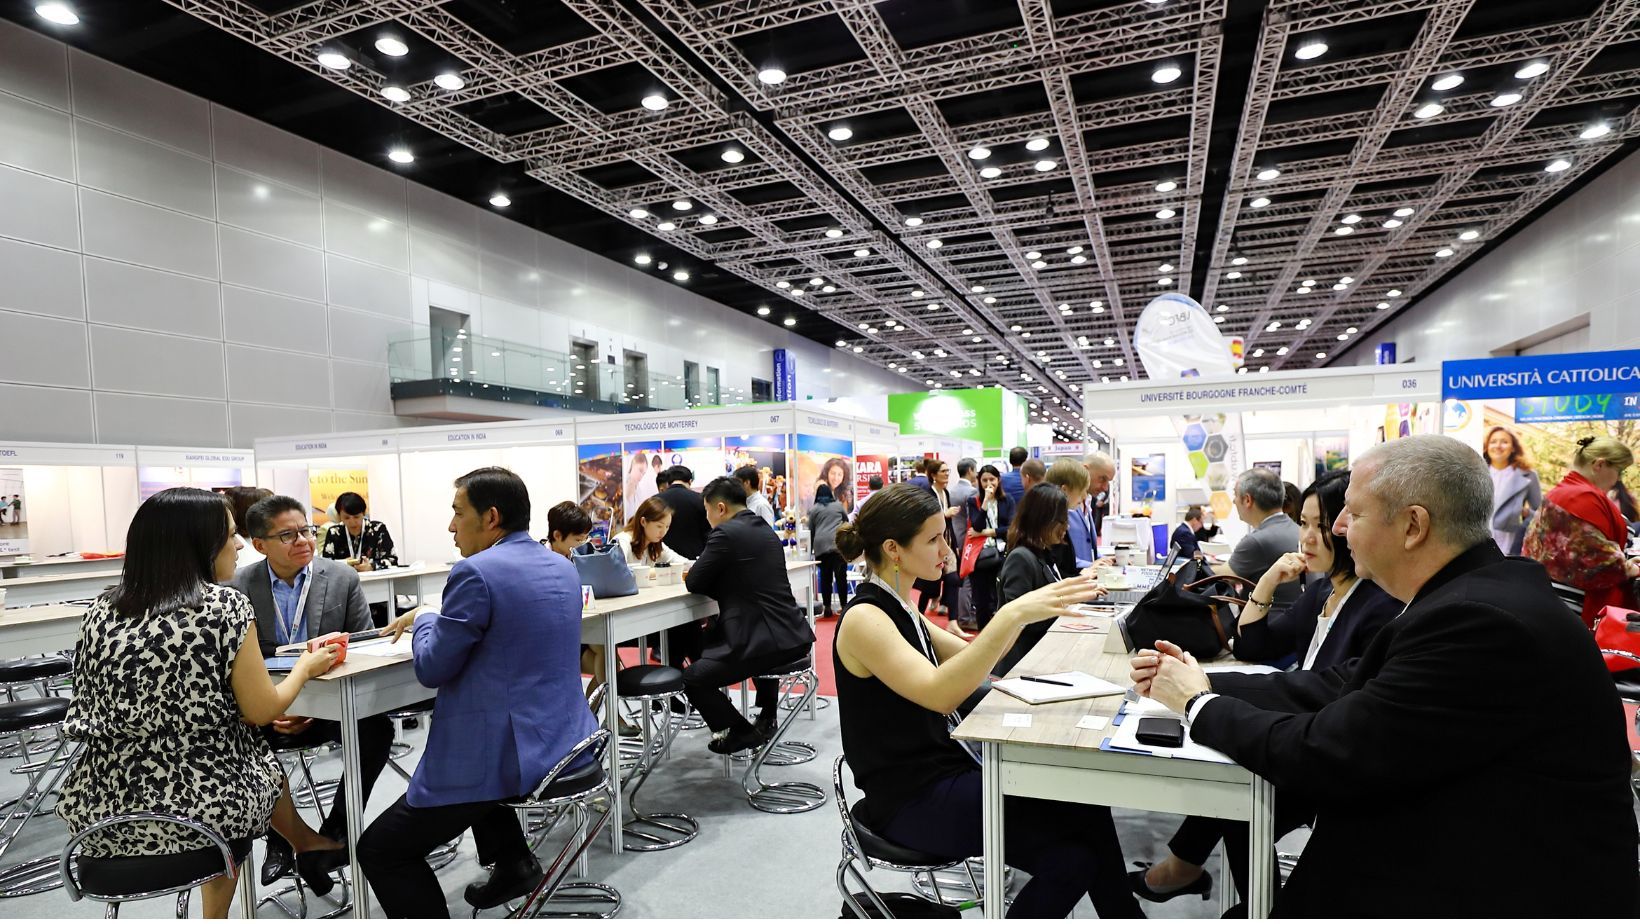 Kuala Lumpur Convention Centre Sowcases Malaysia's Hidden Gems at the Meetings Show in London